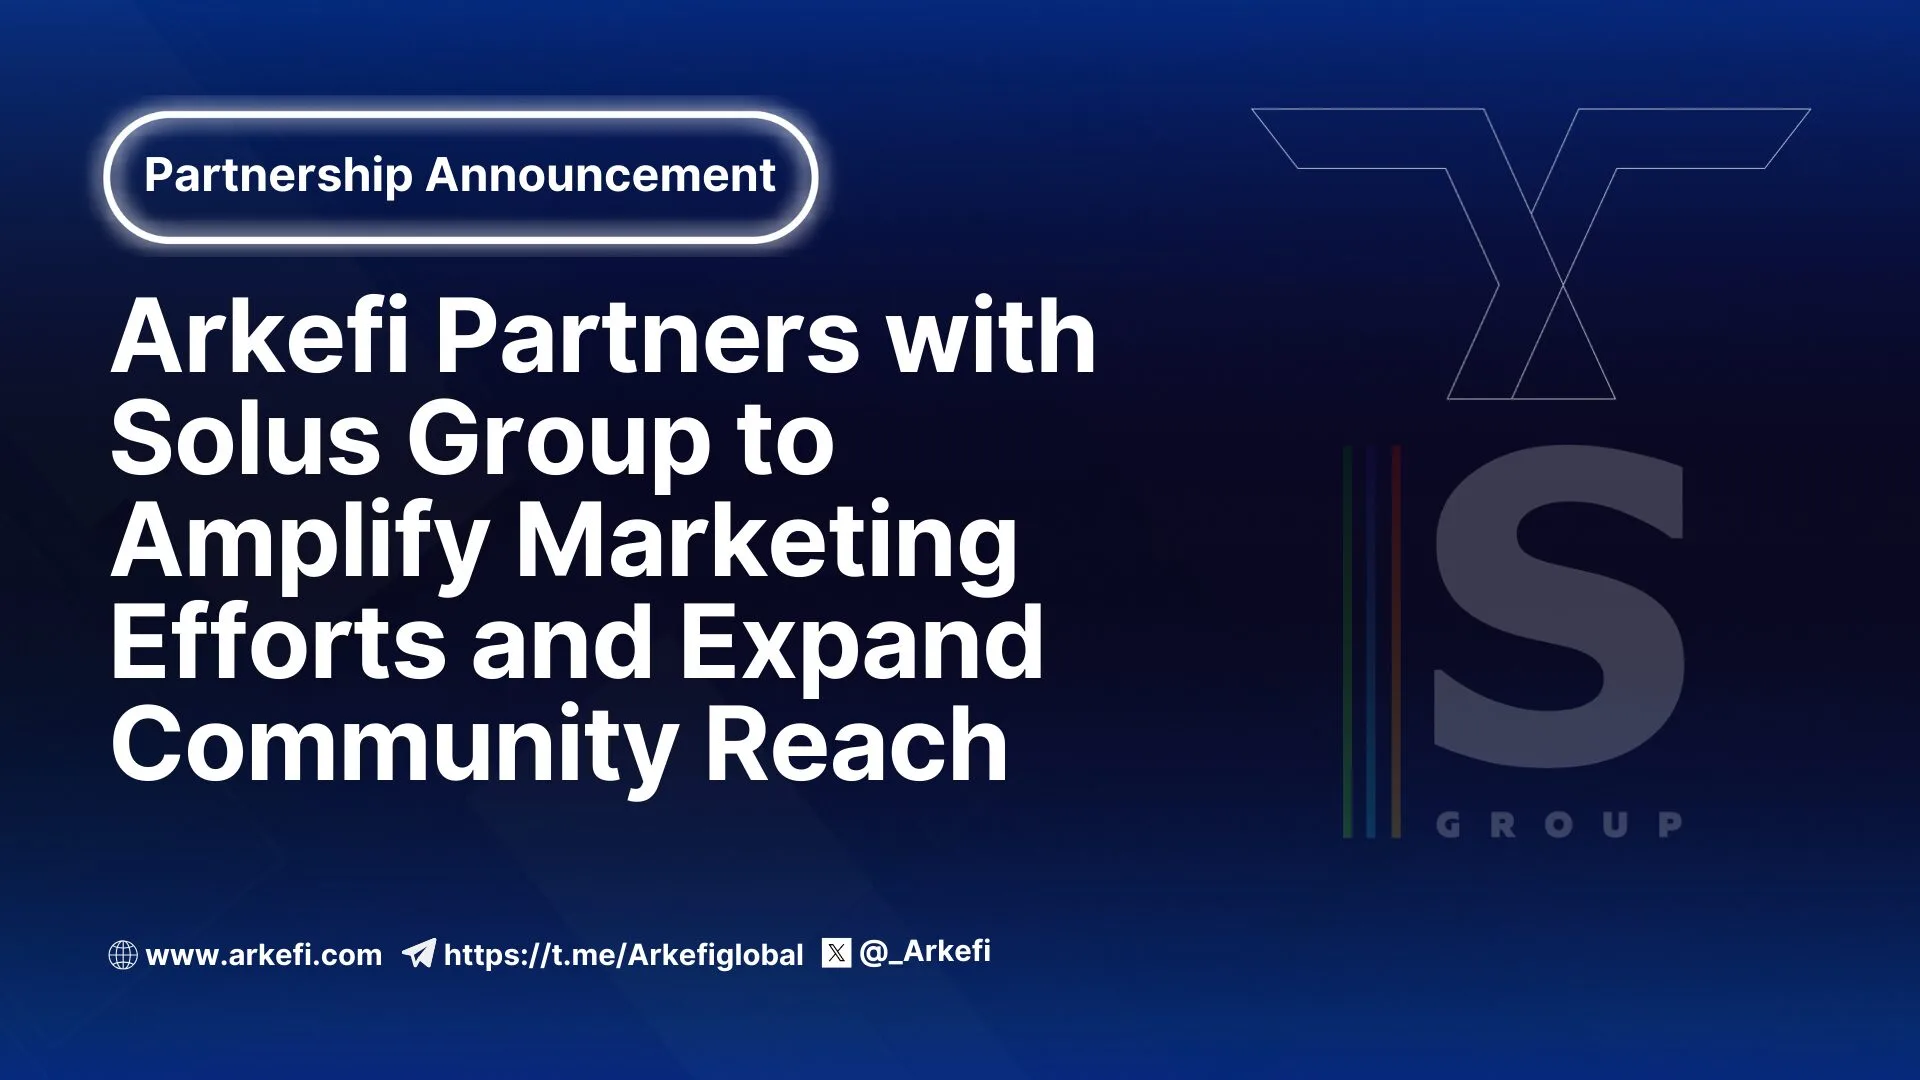 Arkefi Partners with Solus Group to Amplify Marketing Efforts and Expand Community Reach